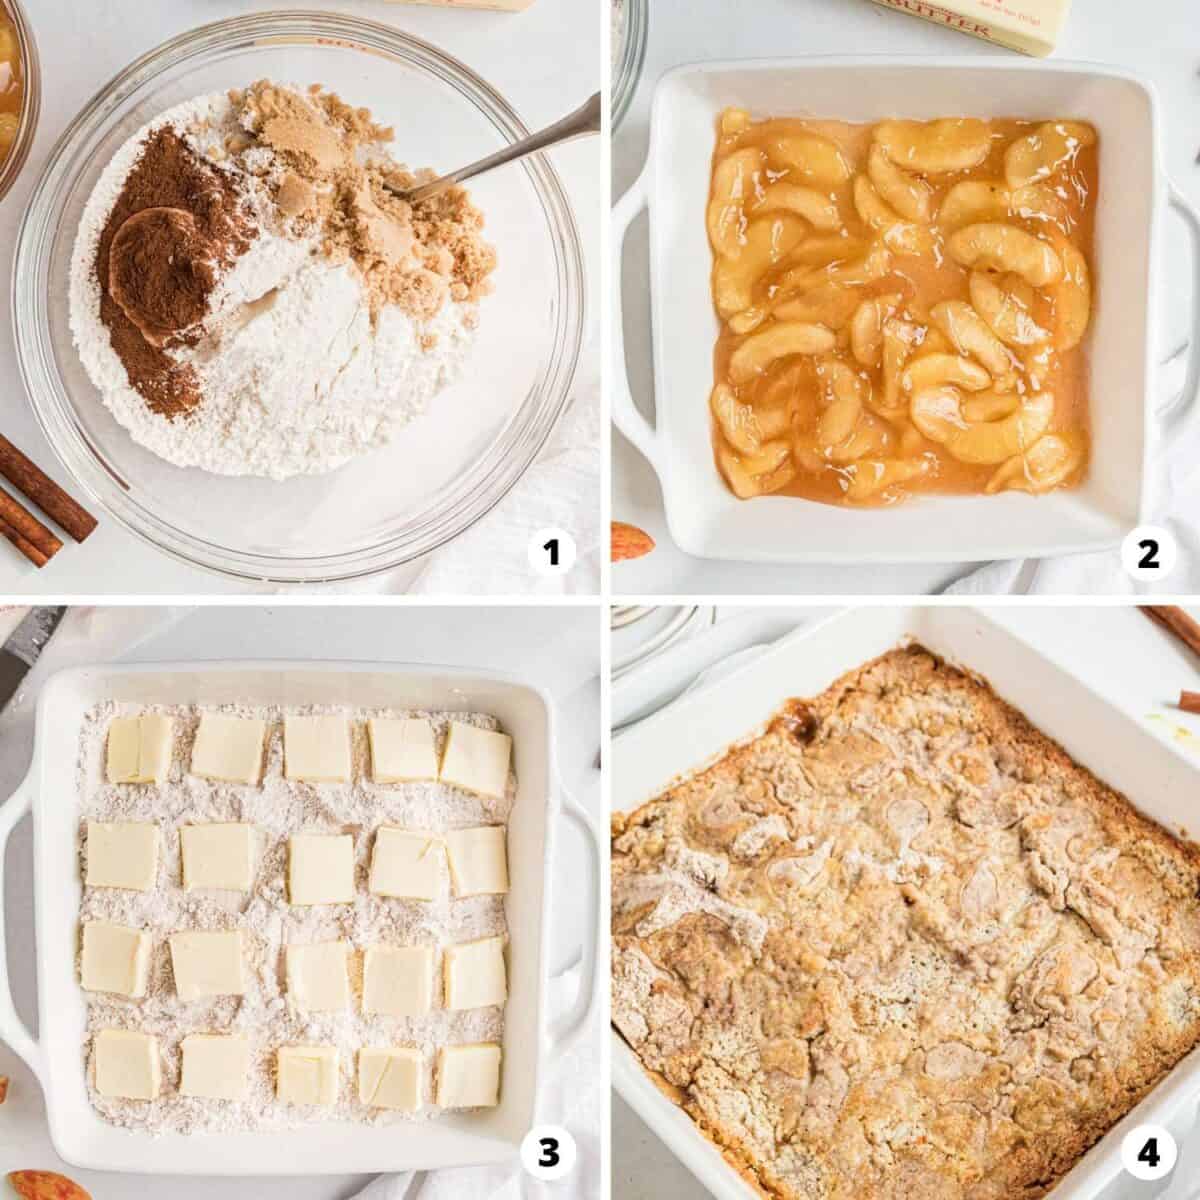 Showing how to make apple dump cake in a 4 step collage.